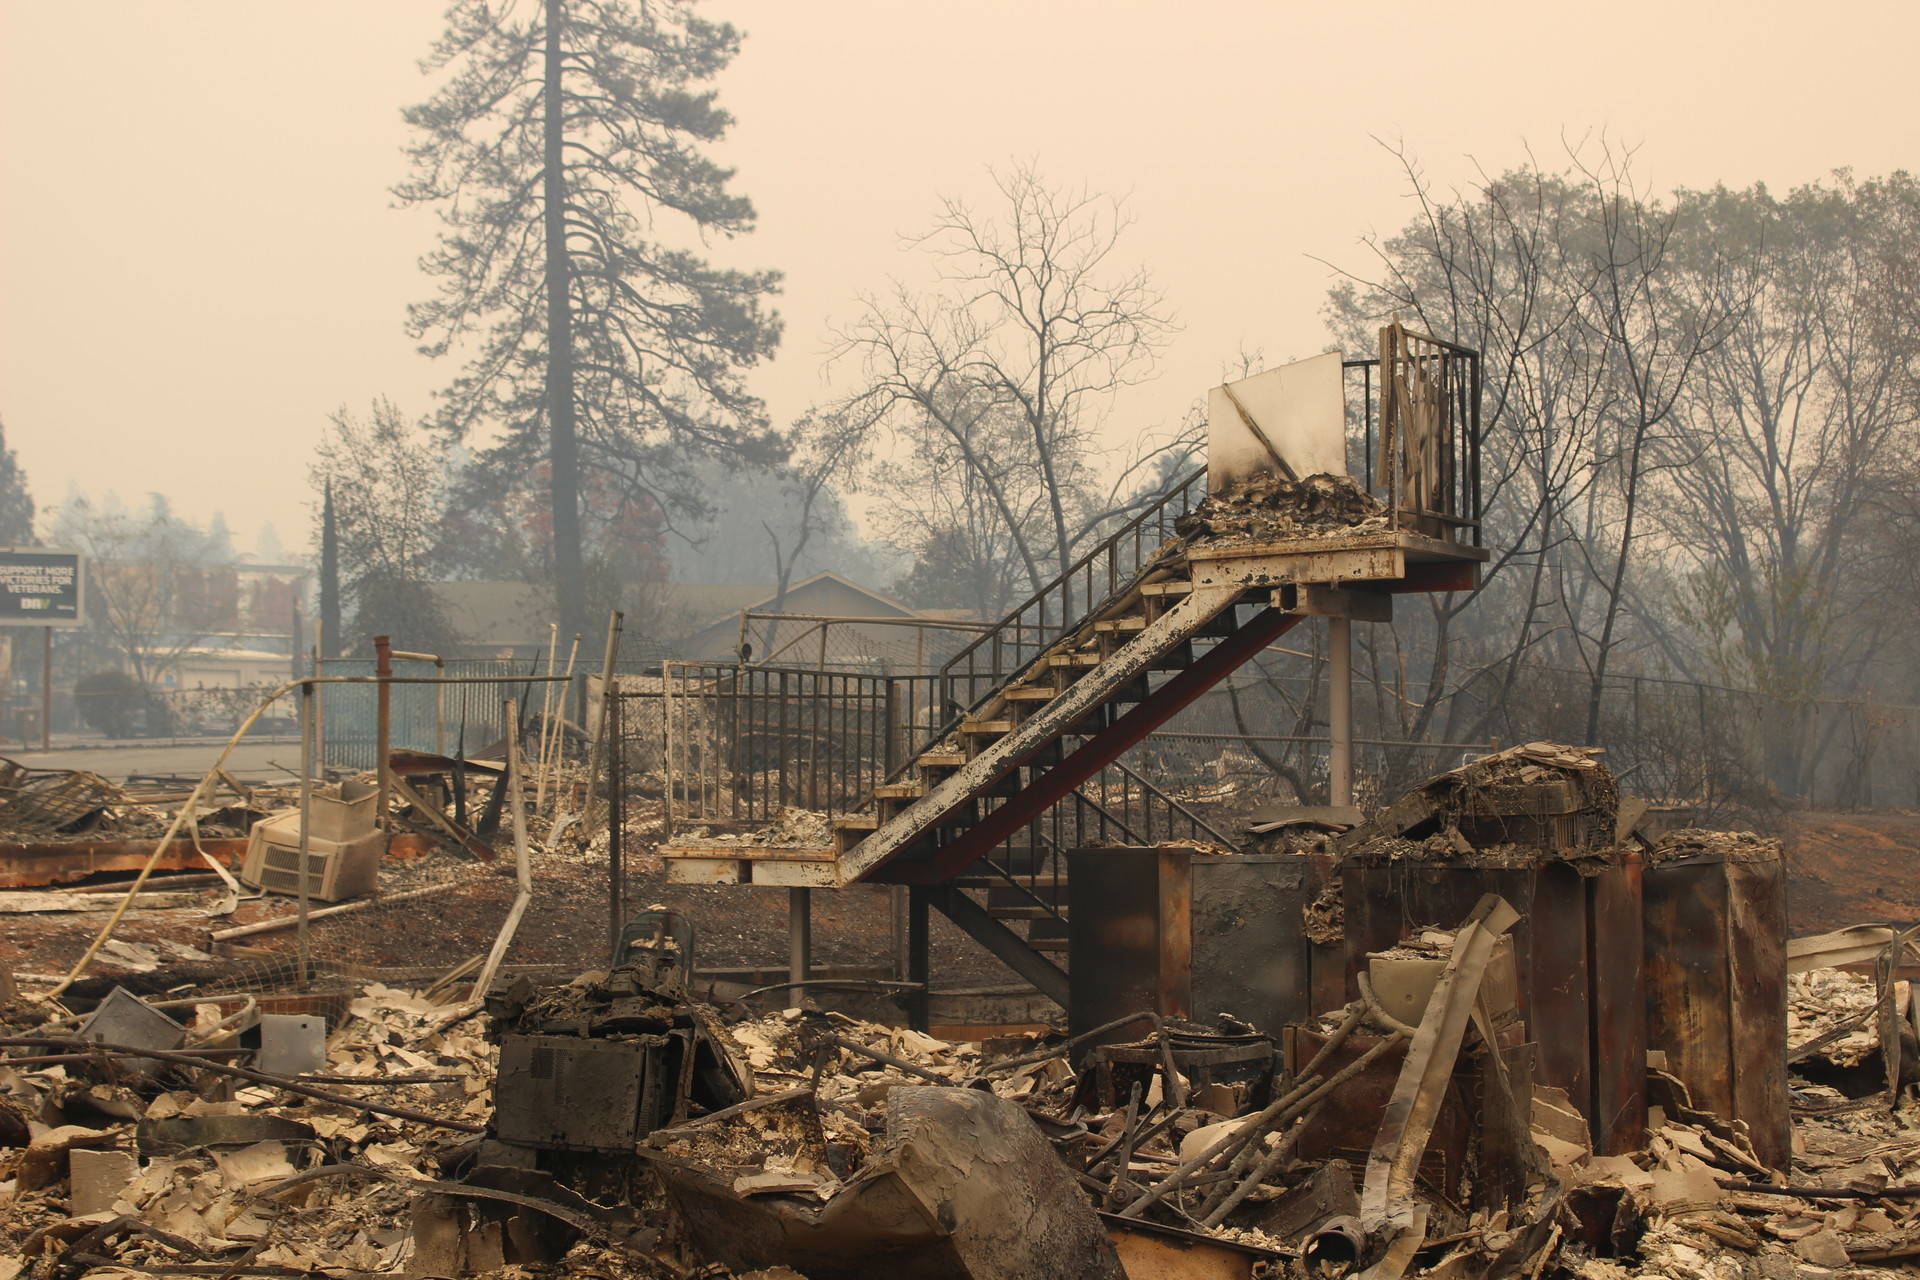 The debris left behind by the Camp Fire in Butte County will take a year to clean up.  Danielle Venton/KQED